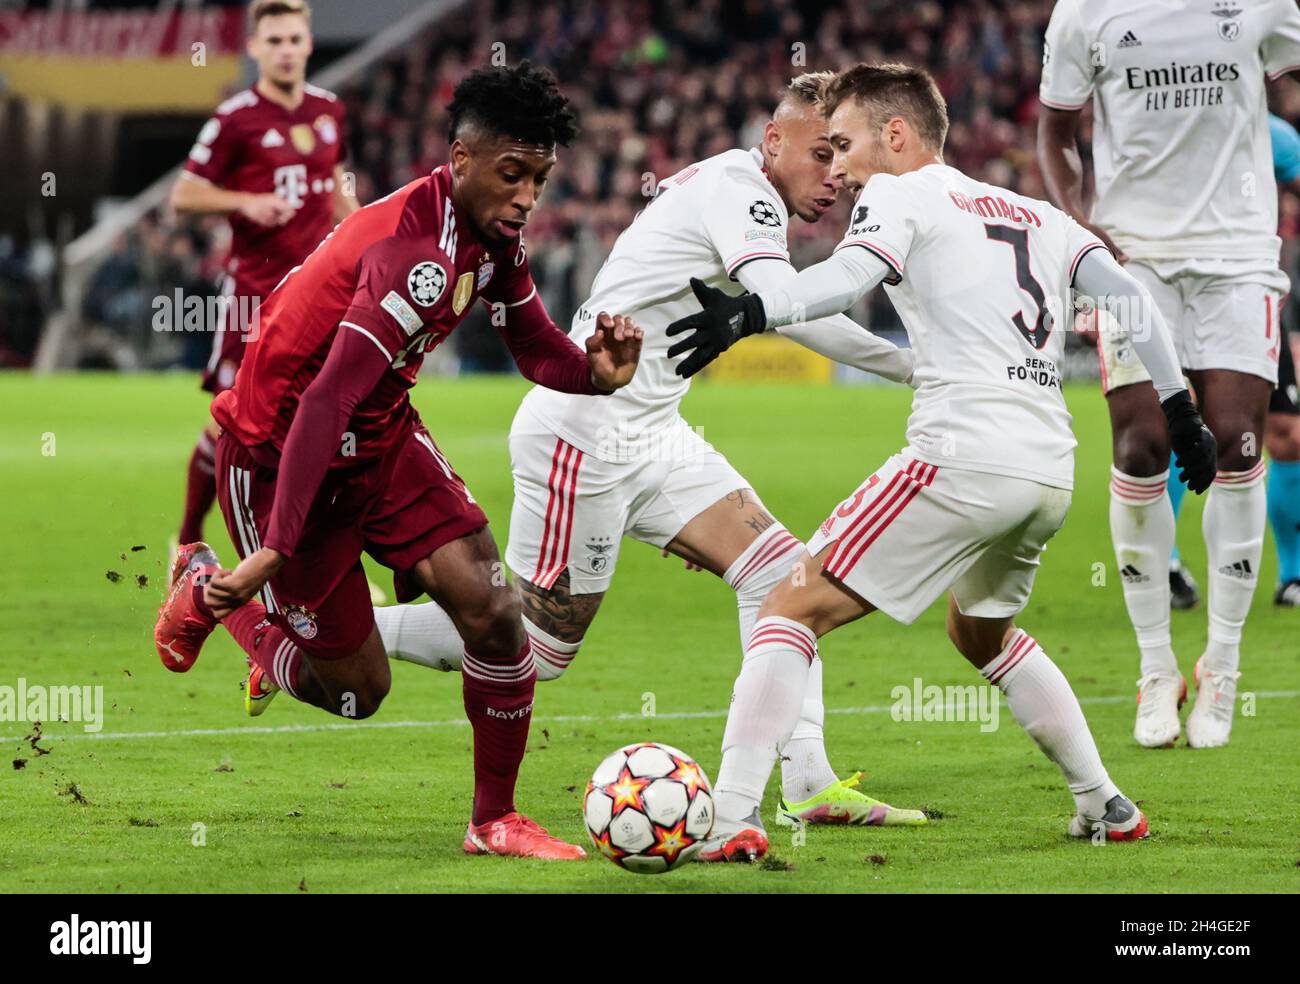 Munich, Germany. 2nd Nov, 2021. Kingsley Coman (L) of Bayern Munich breaks through the defense from Alejandro Grimaldo (R) of Benfica during a UEFA Champions League Group E match between Bayern Munich of Germany and SL Benfica of Portugal in Munich, Germany, on Nov. 2, 2021. Credit: Philippe Ruiz/Xinhua/Alamy Live News Stock Photo